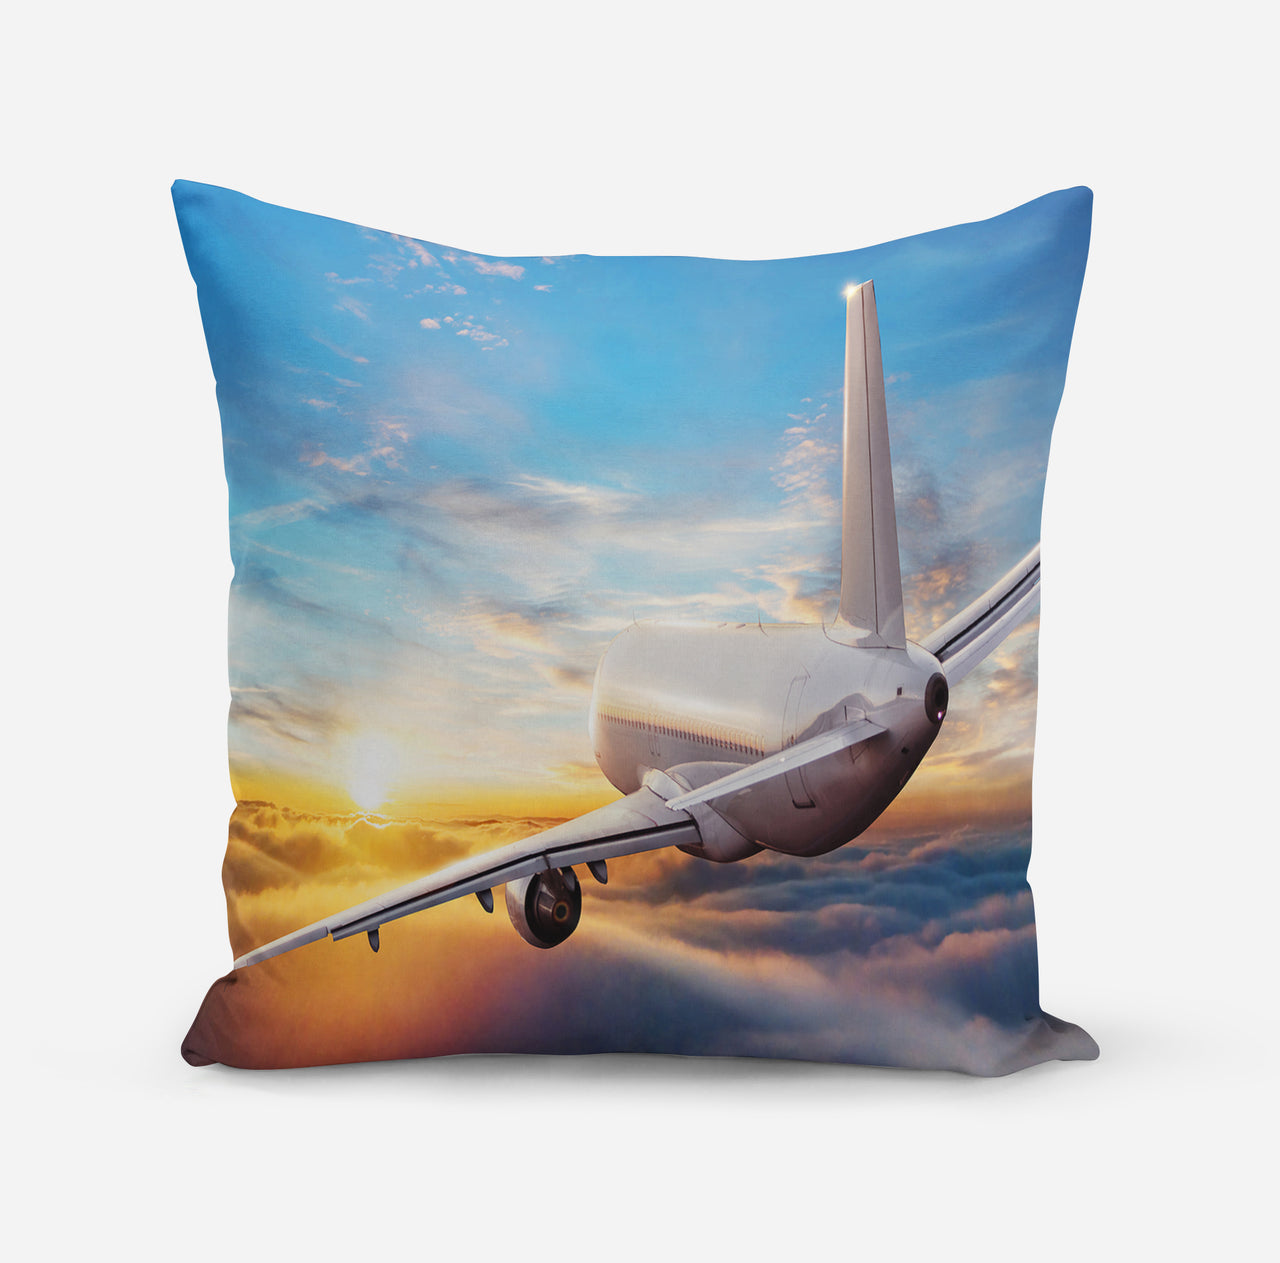 Airliner Jet Cruising over Clouds Designed Pillows